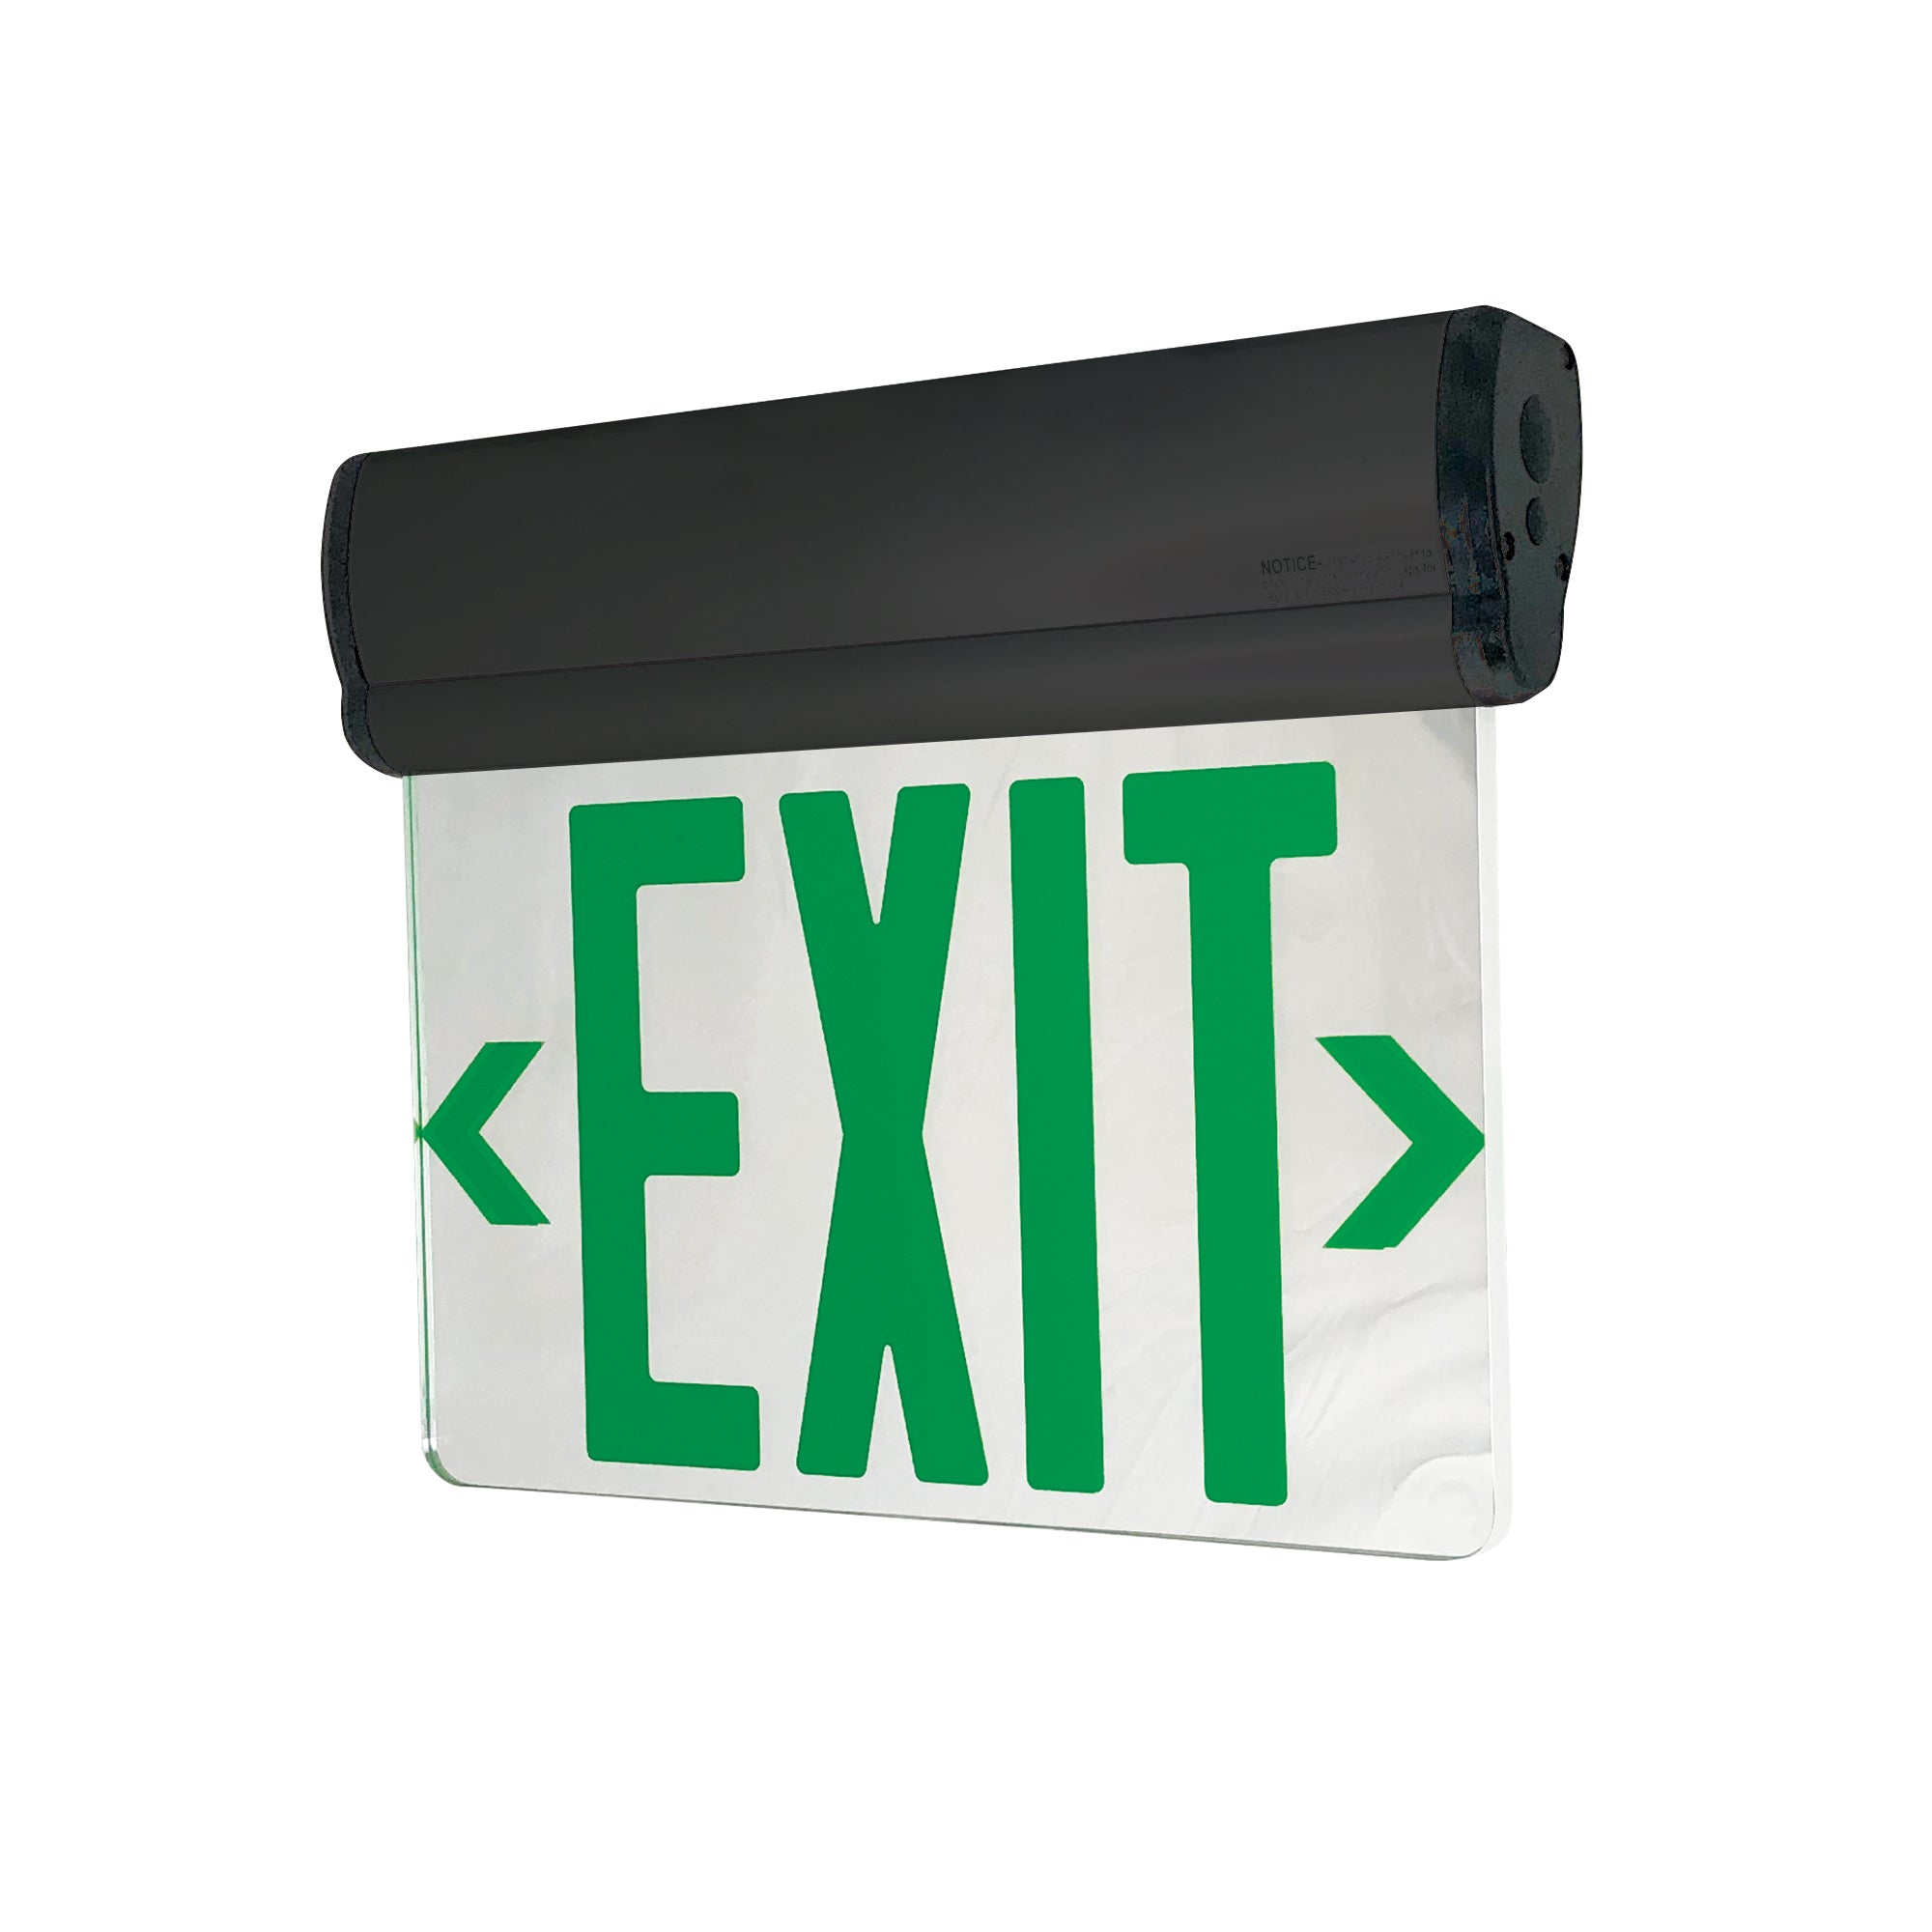 Nora Lighting NX-810-LEDG2MB - Exit / Emergency - Surface Adjustable LED Edge-Lit Exit Sign, AC Only, 6 Inch Green Letters, Double Face / Mirrored Acrylic, Black Housing